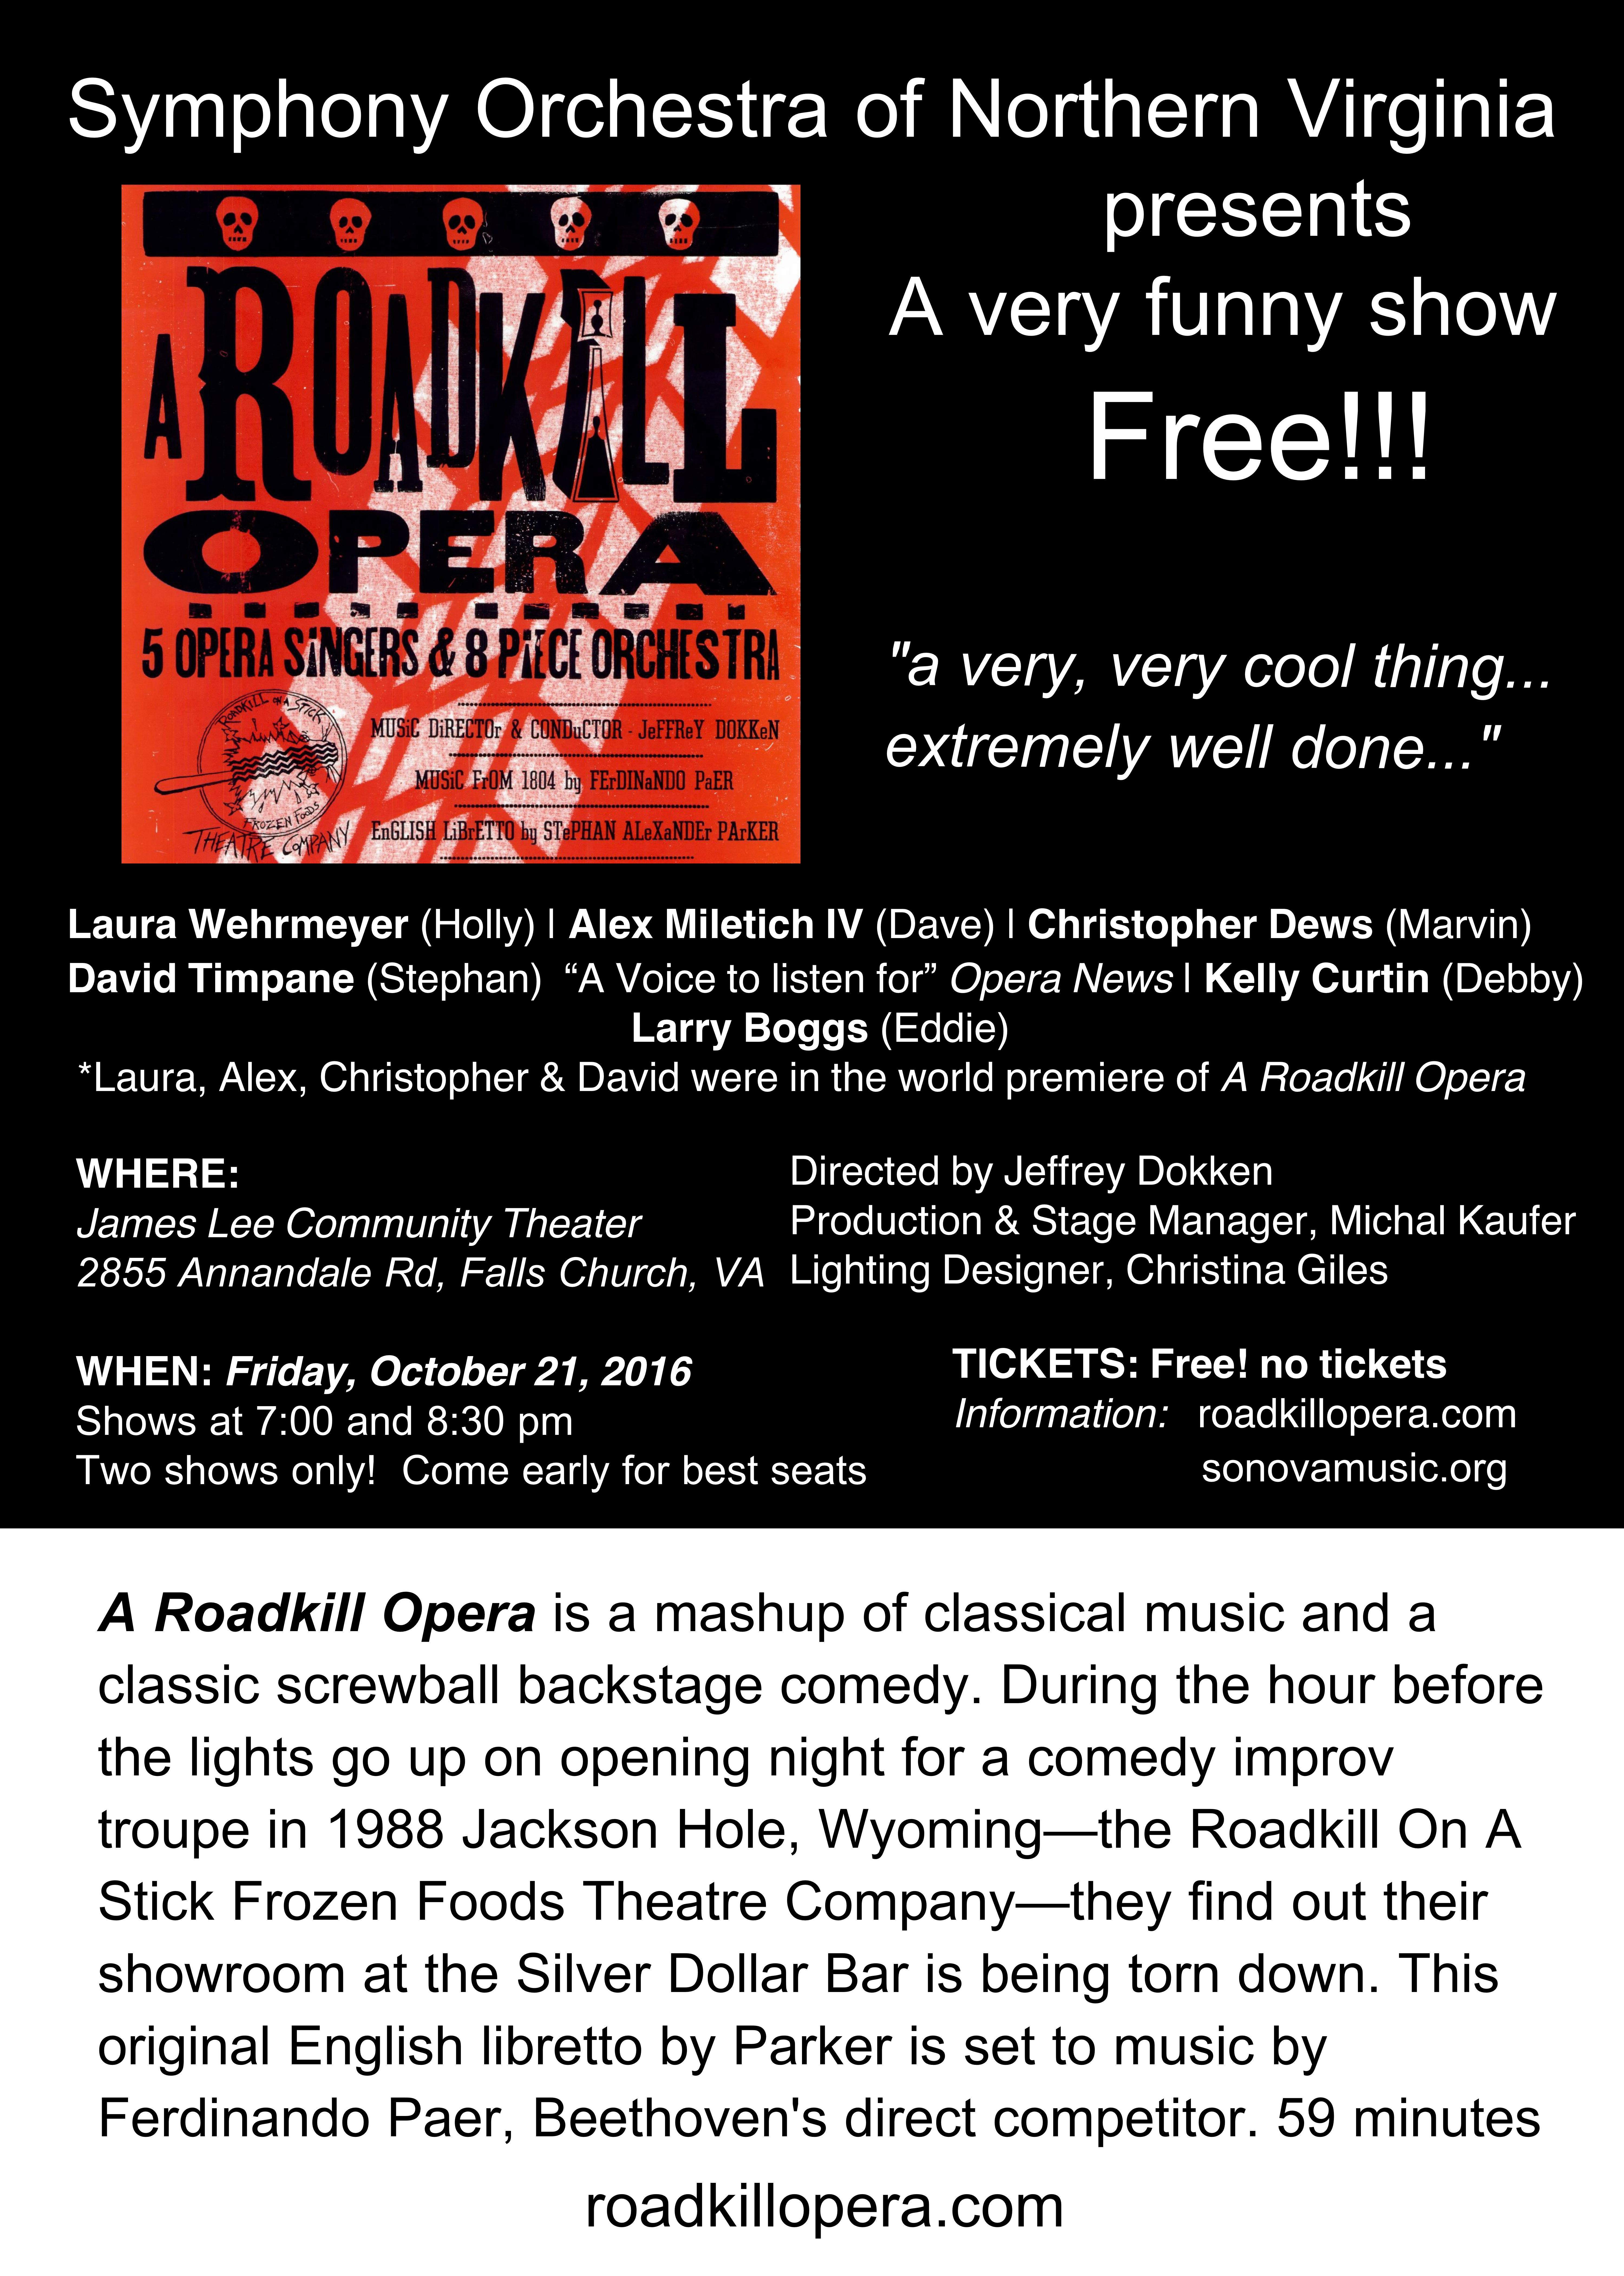 Postcard with details on the October 21, 2016 performances of A Roadkill Opera by the Symphony Orchestra of Northern Virginia